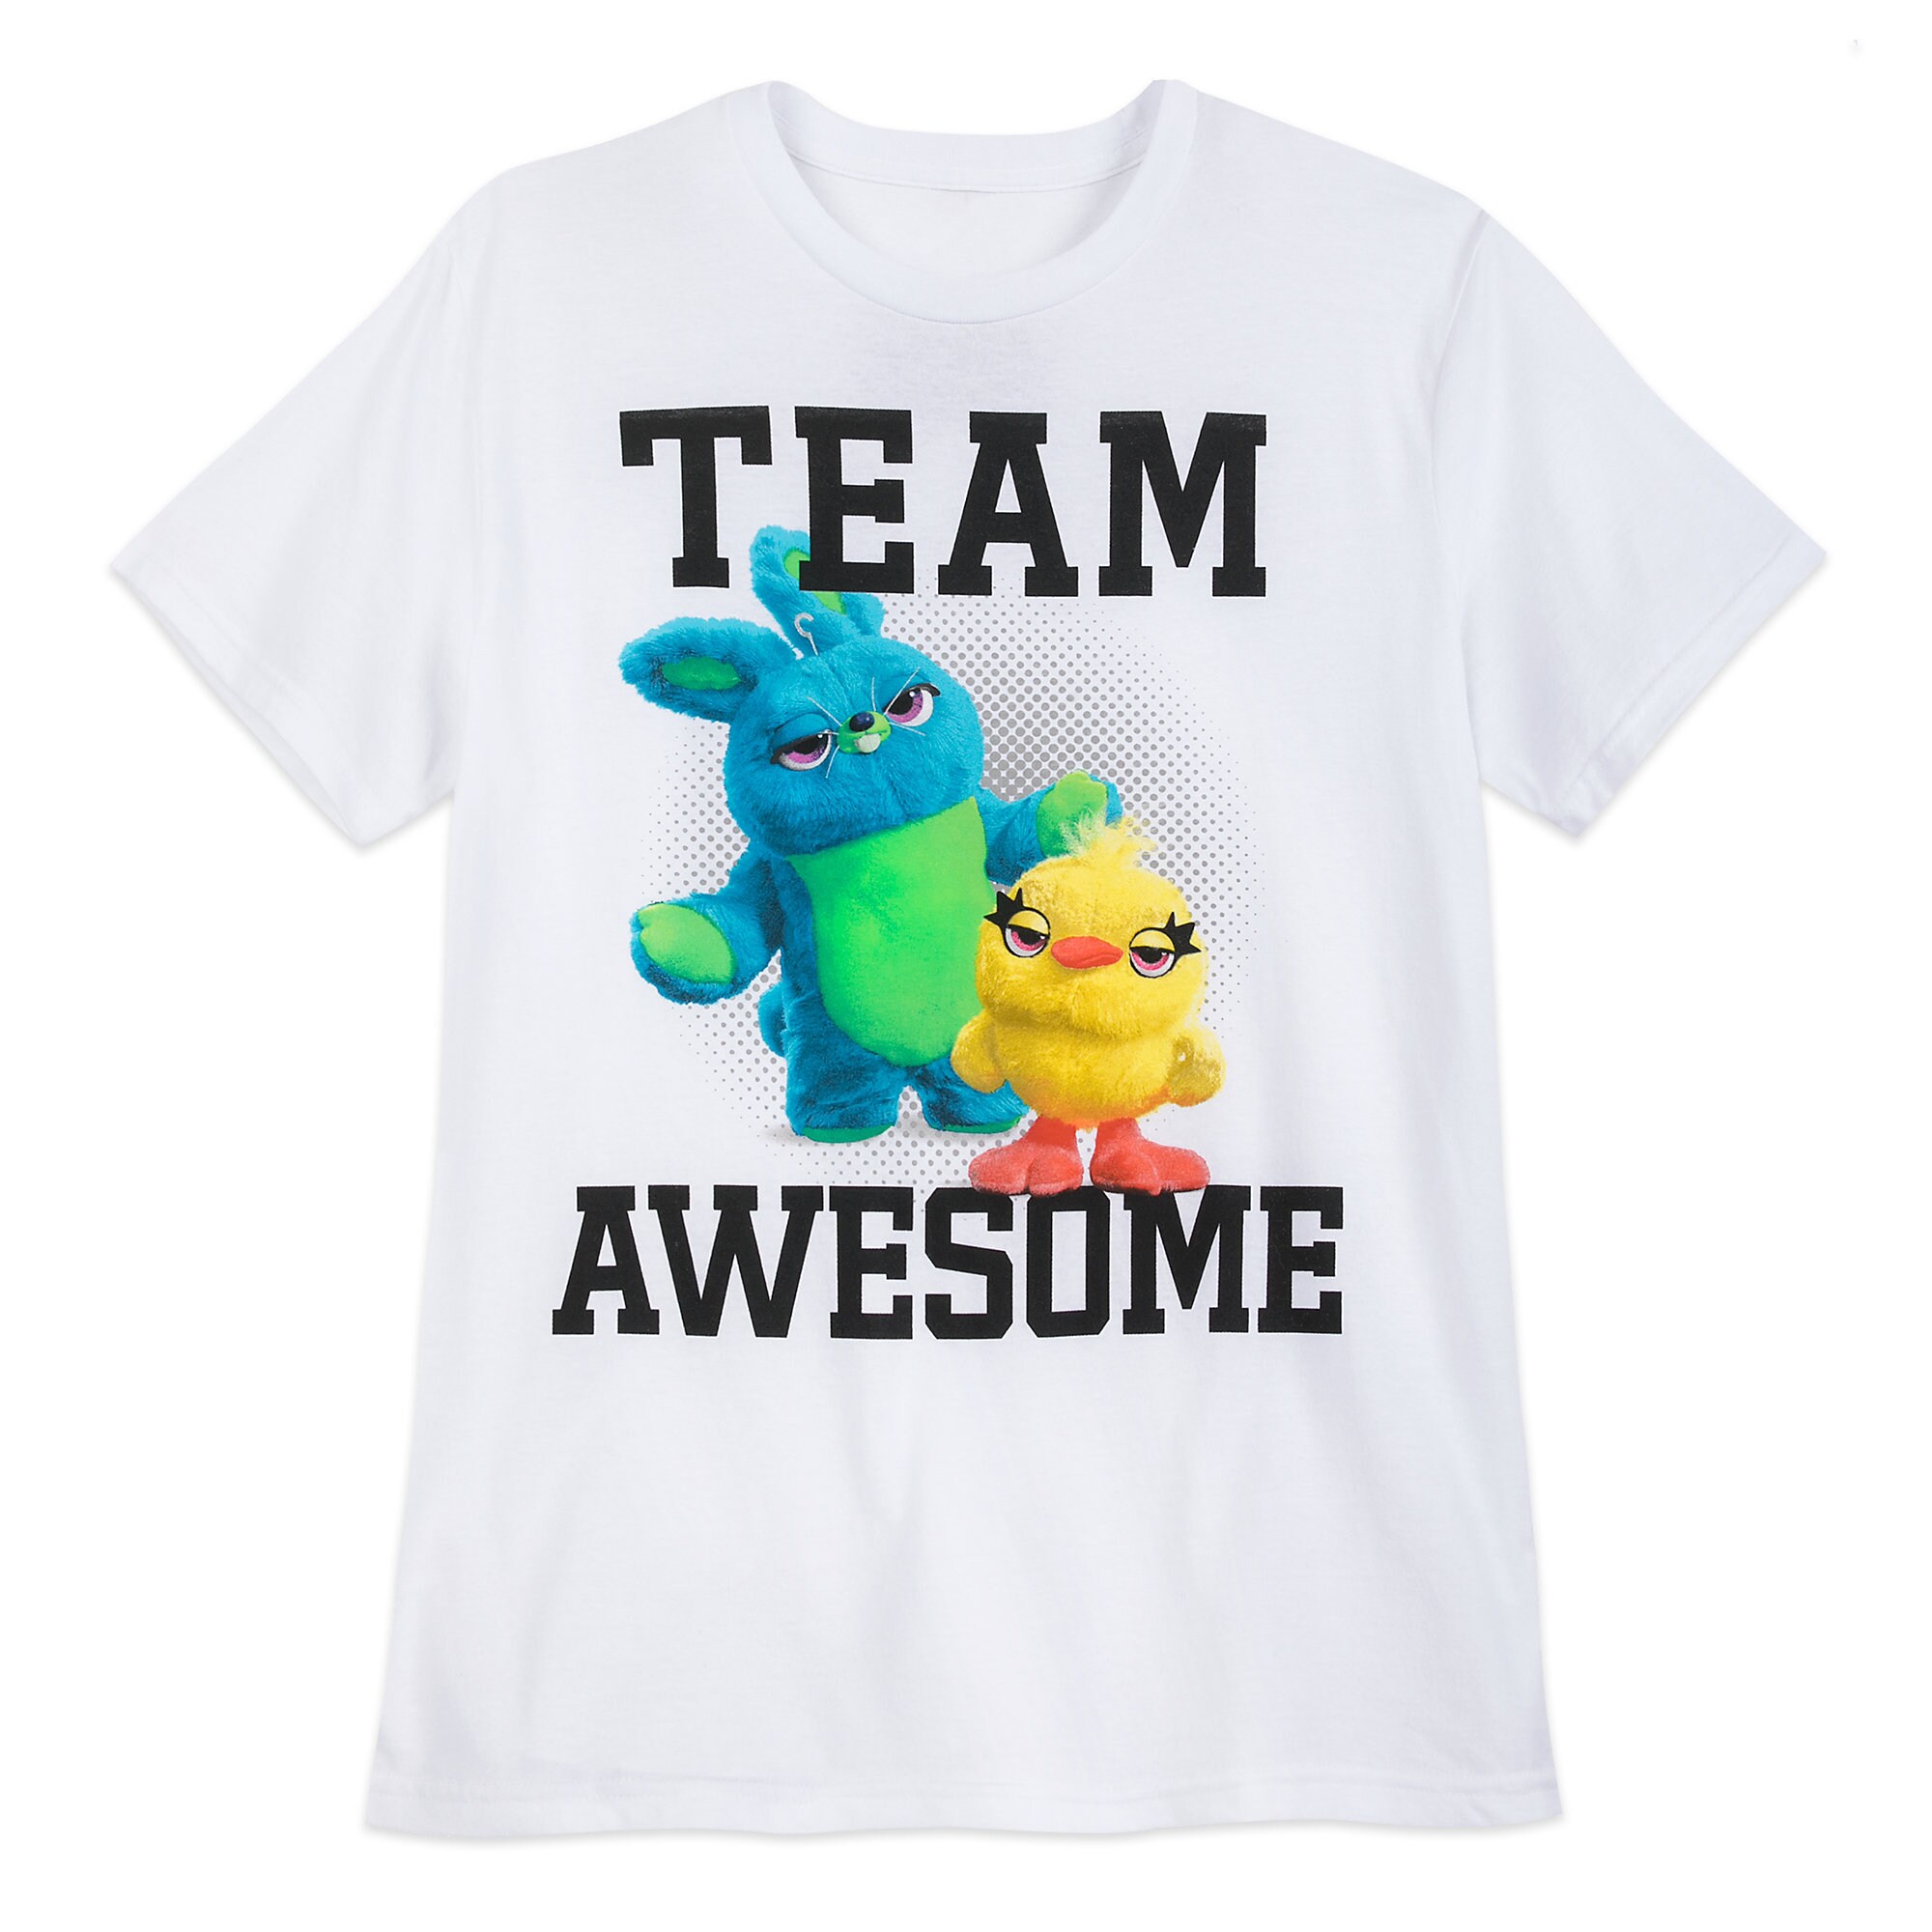 Ducky and Bunny ''Team Awesome'' T-Shirt for Adults - Toy Story 4